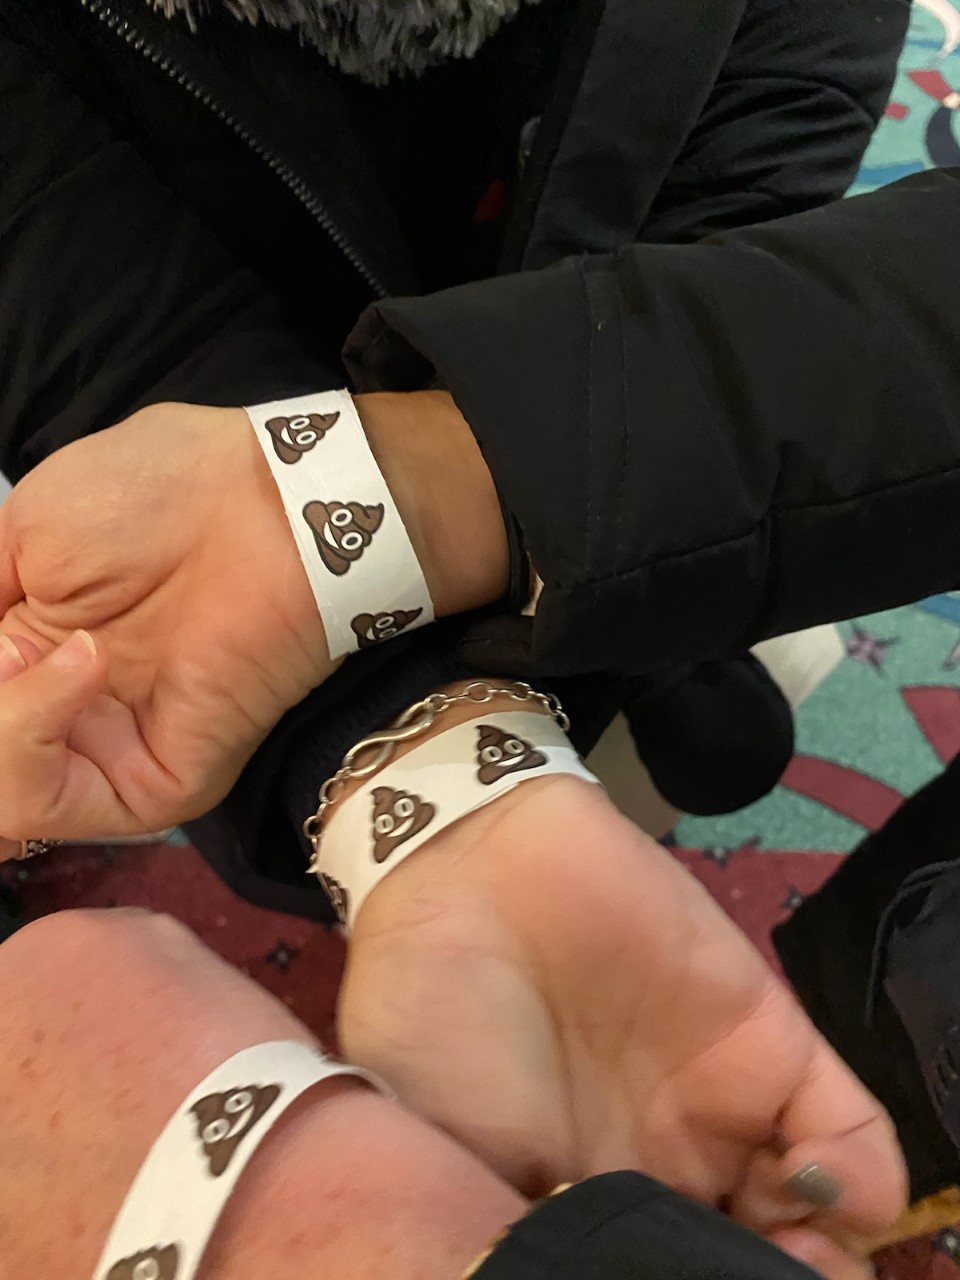 Vicki McKenna on X: A recount volunteer says she and others were forced to  wear these bracelets to participate in recount. Staff, attorneys and  volunteers all wearing them. Do these people NOT